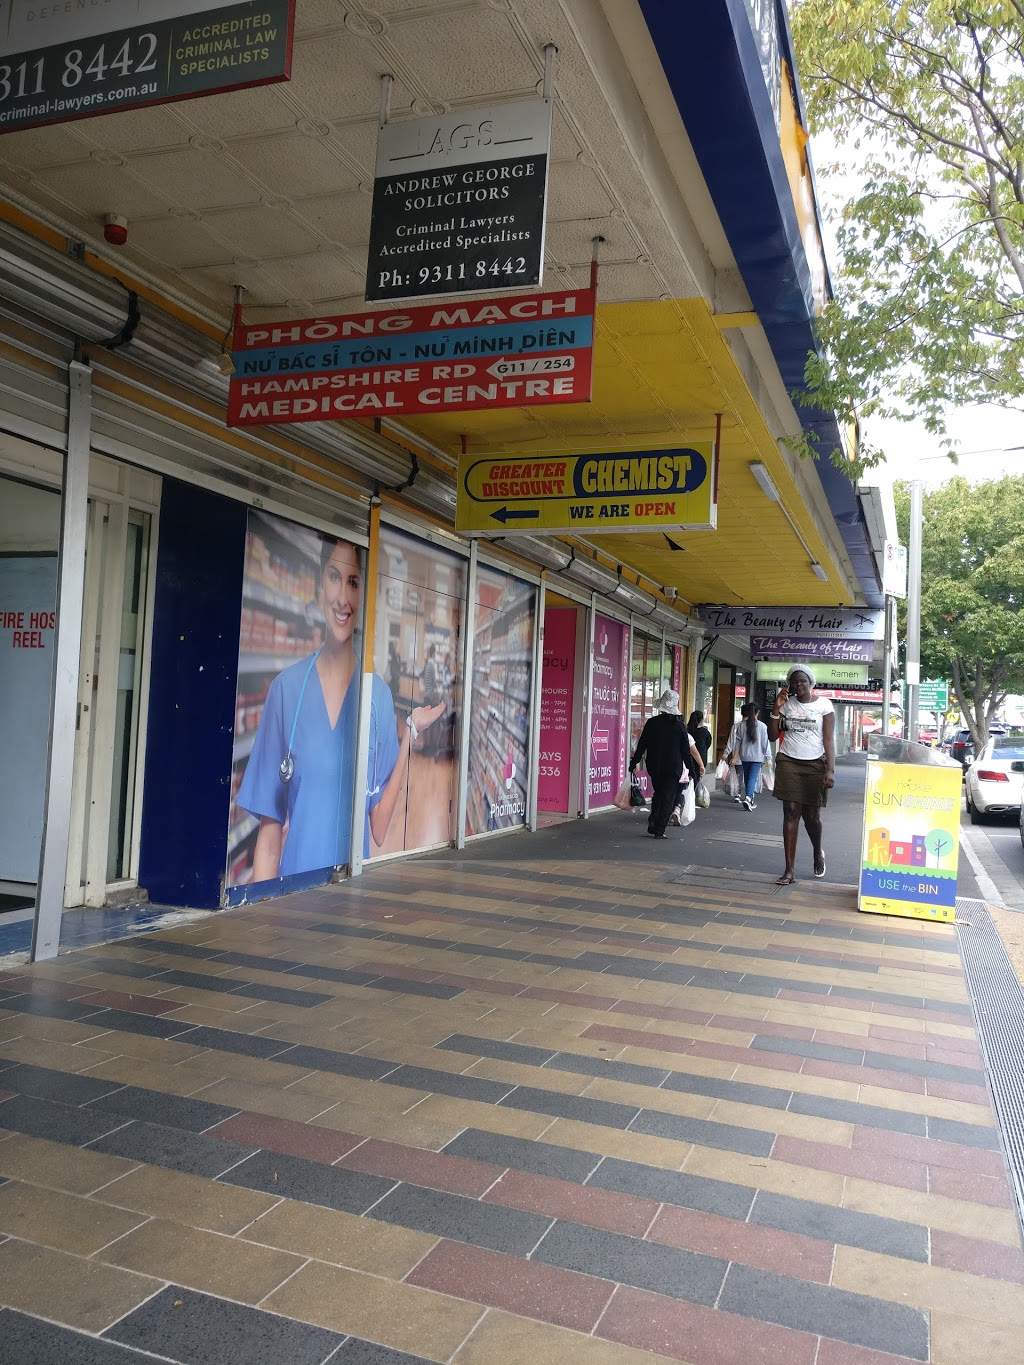 The Greater Discount Chemist | pharmacy | 254 Hampshire Rd, Sunshine VIC 3020, Australia | 0393111336 OR +61 3 9311 1336